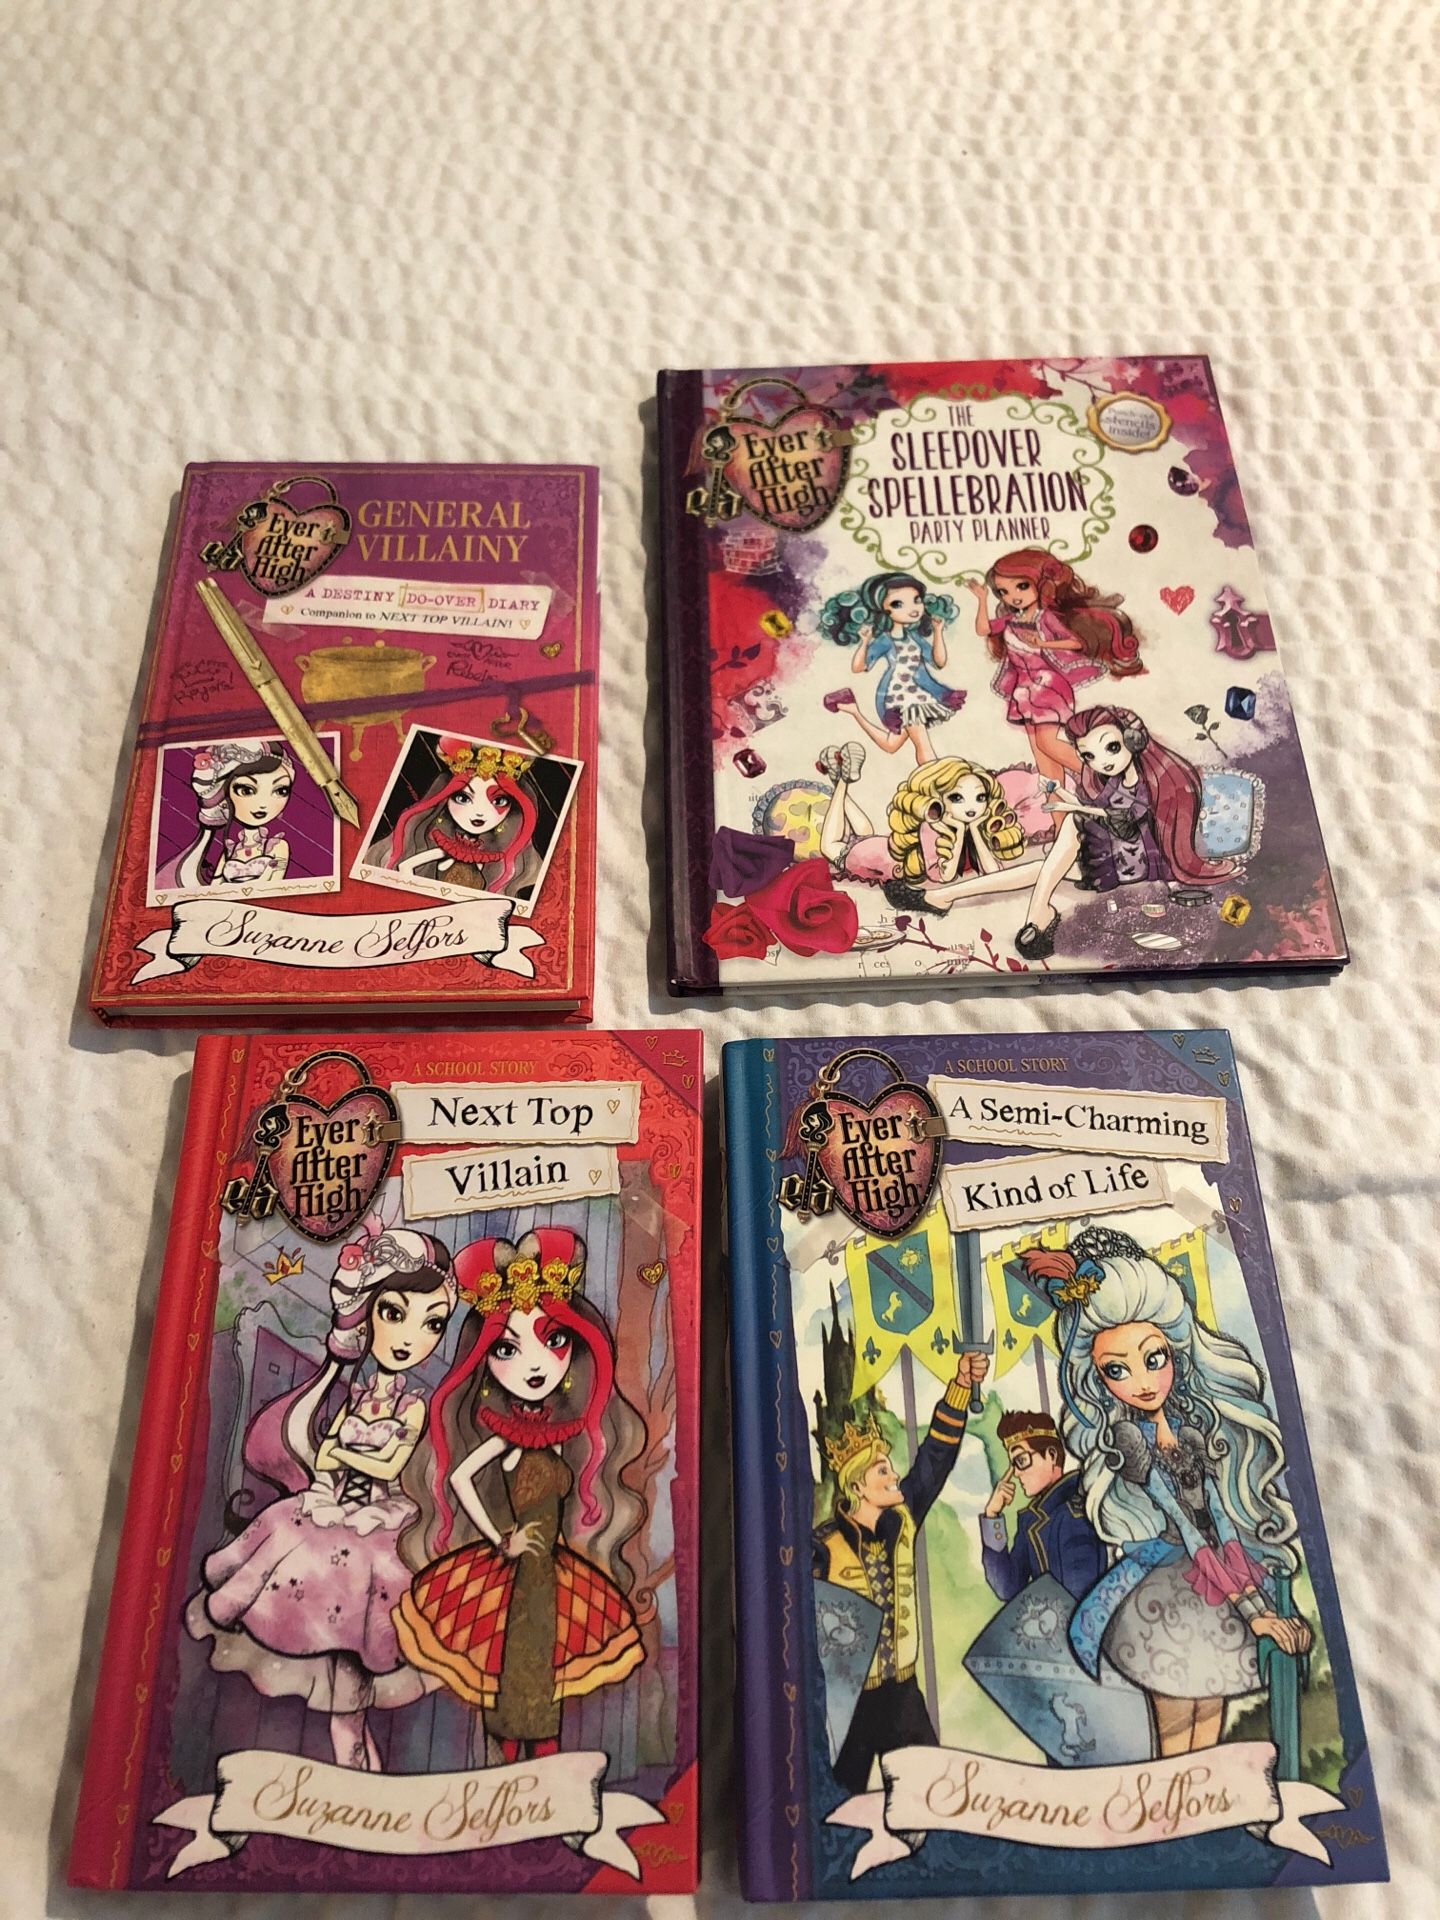 Ever after high book bundle-all brand new